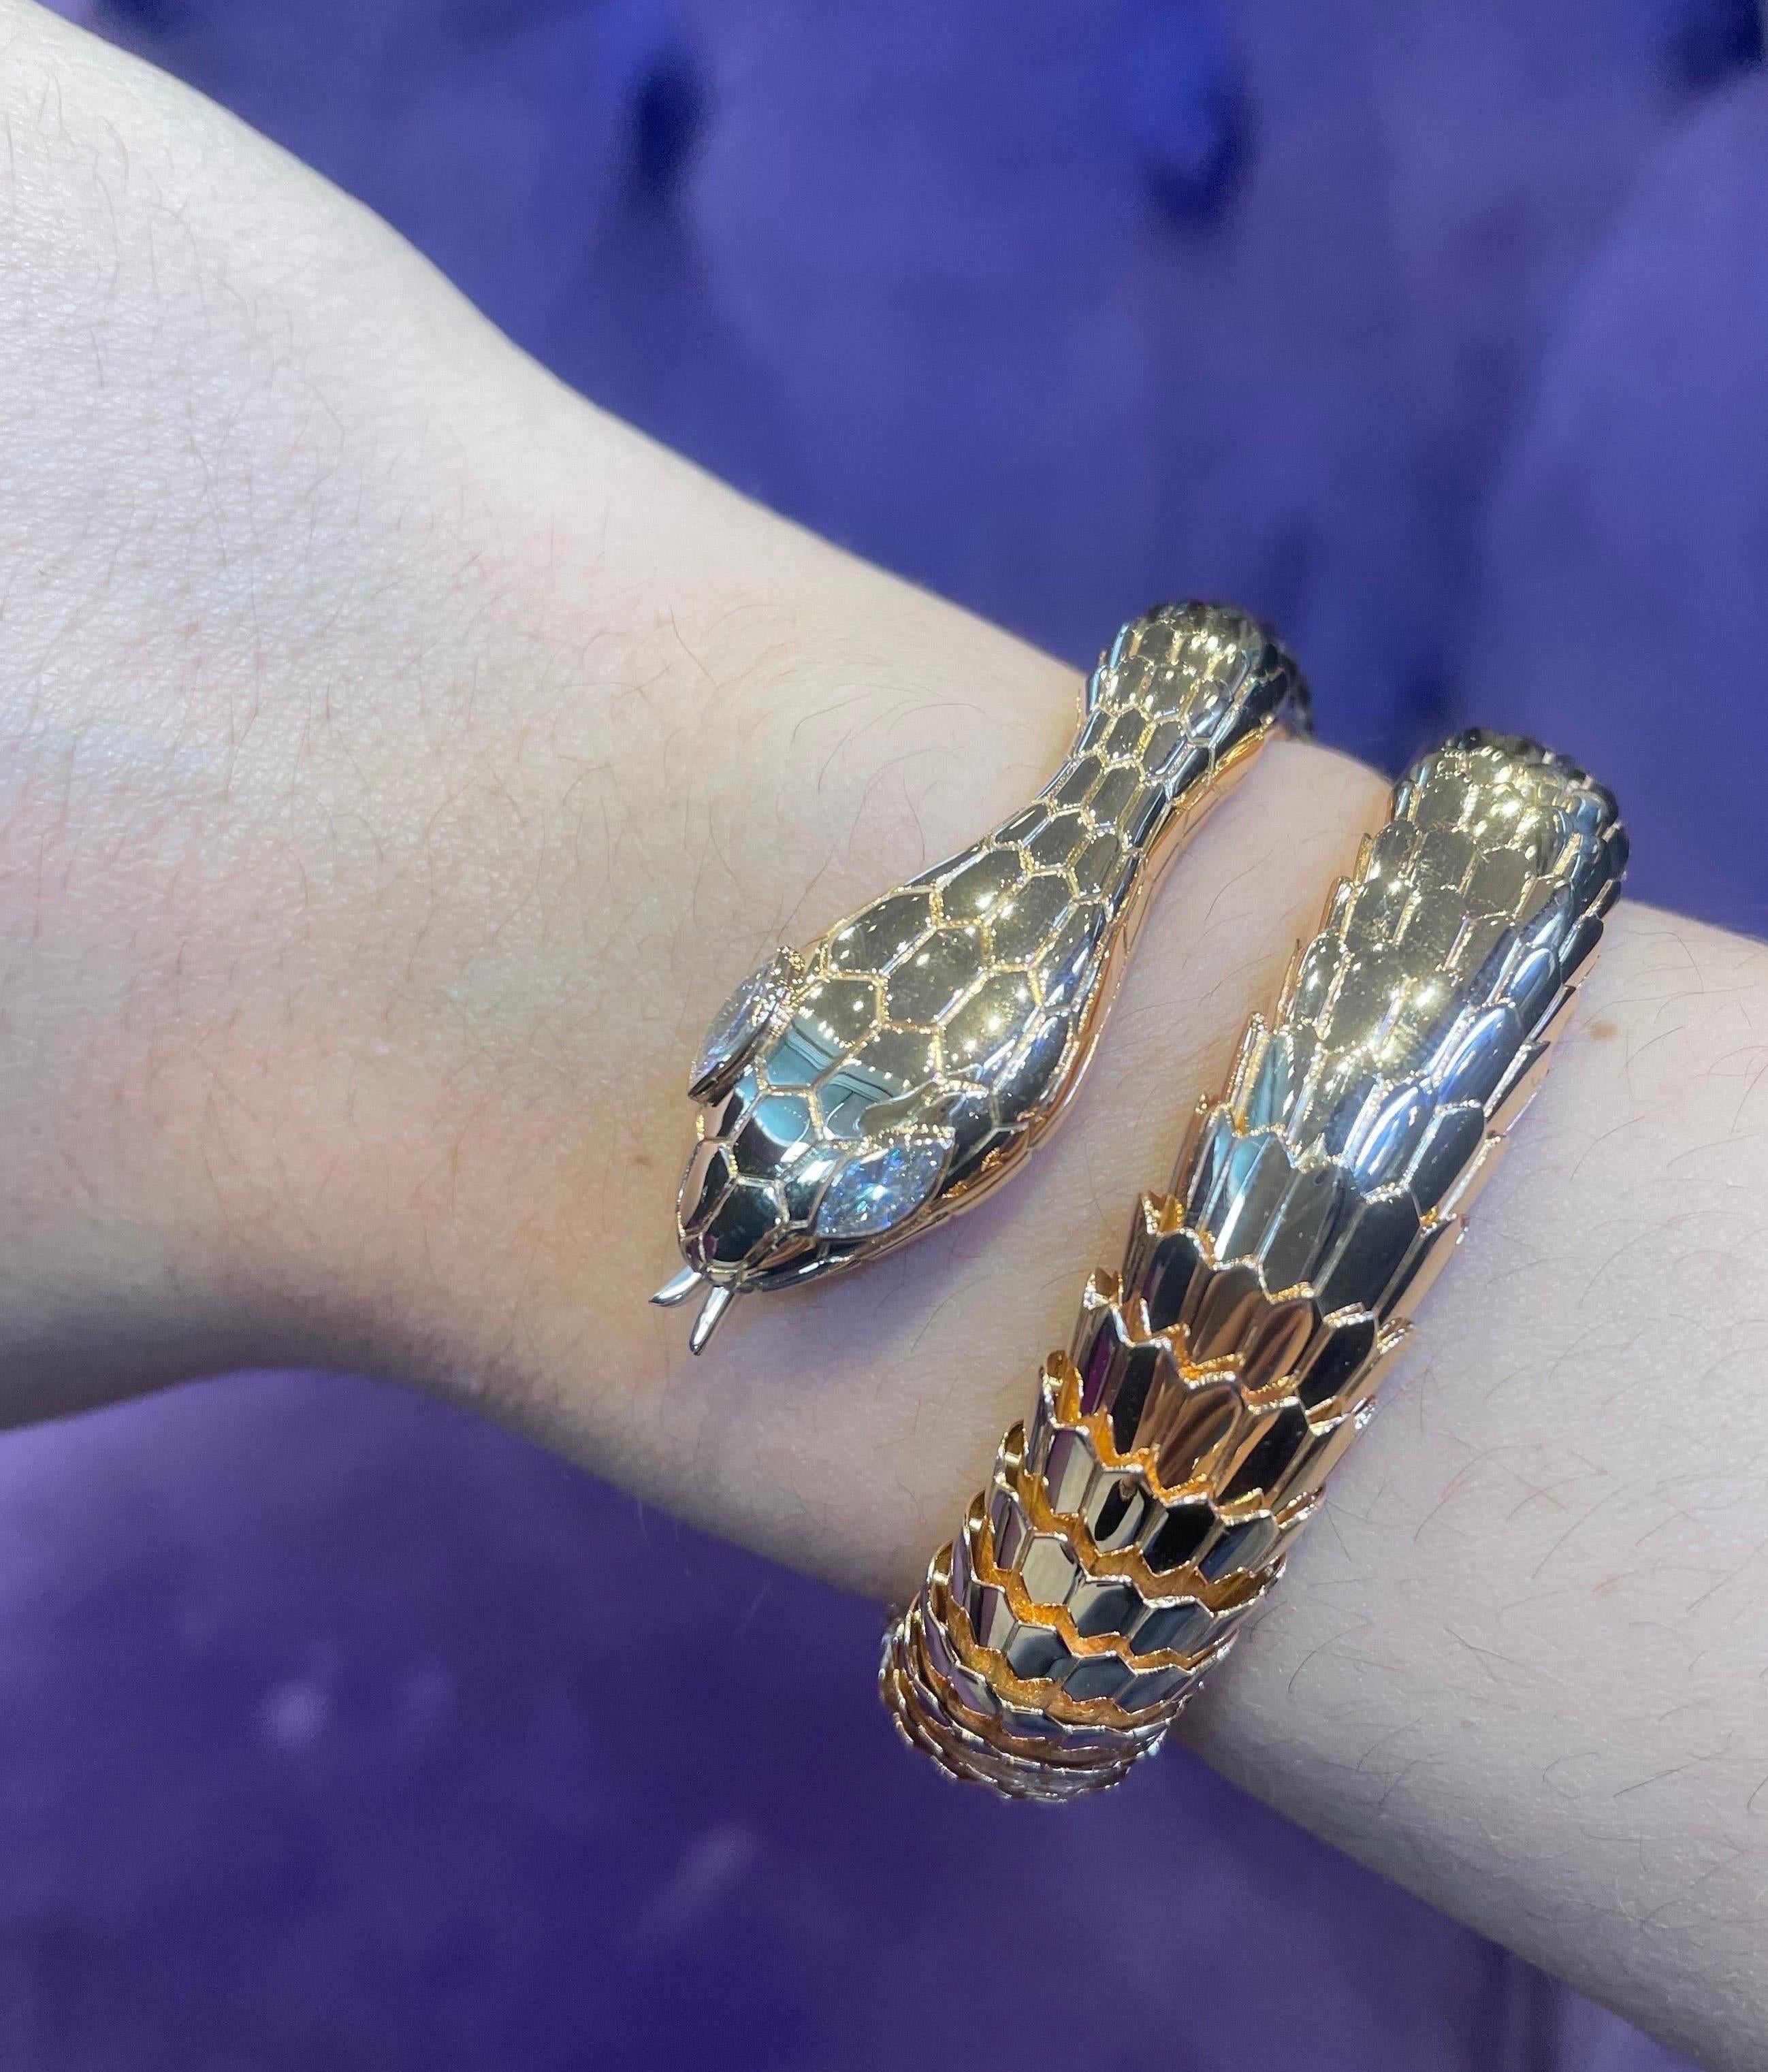 Illario Rose Gold and Diamond Snake Bracelet 

A beautiful rose gold wrap snake bracelet adorned with marquis diamonds depicting the snakes eyes. 

Approximate Measurements: 2 inches 

Illario hallmarked

Stamped: 750

Metal Type: 18 Karat Gold